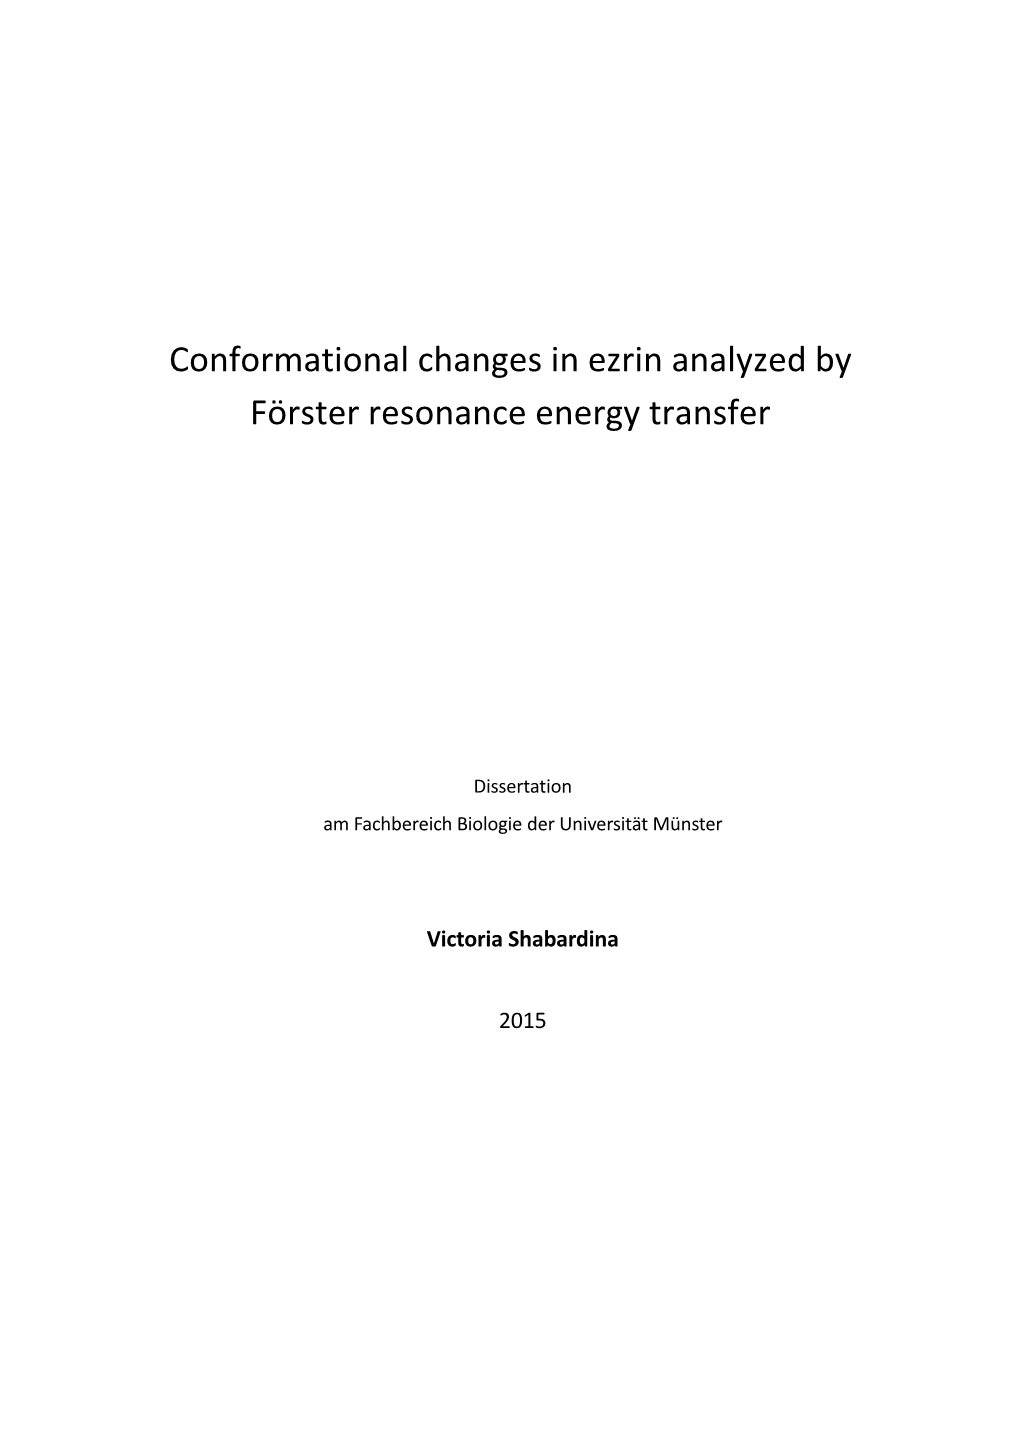 Conformational Changes in Ezrin Analyzed by Förster Resonance Energy Transfer